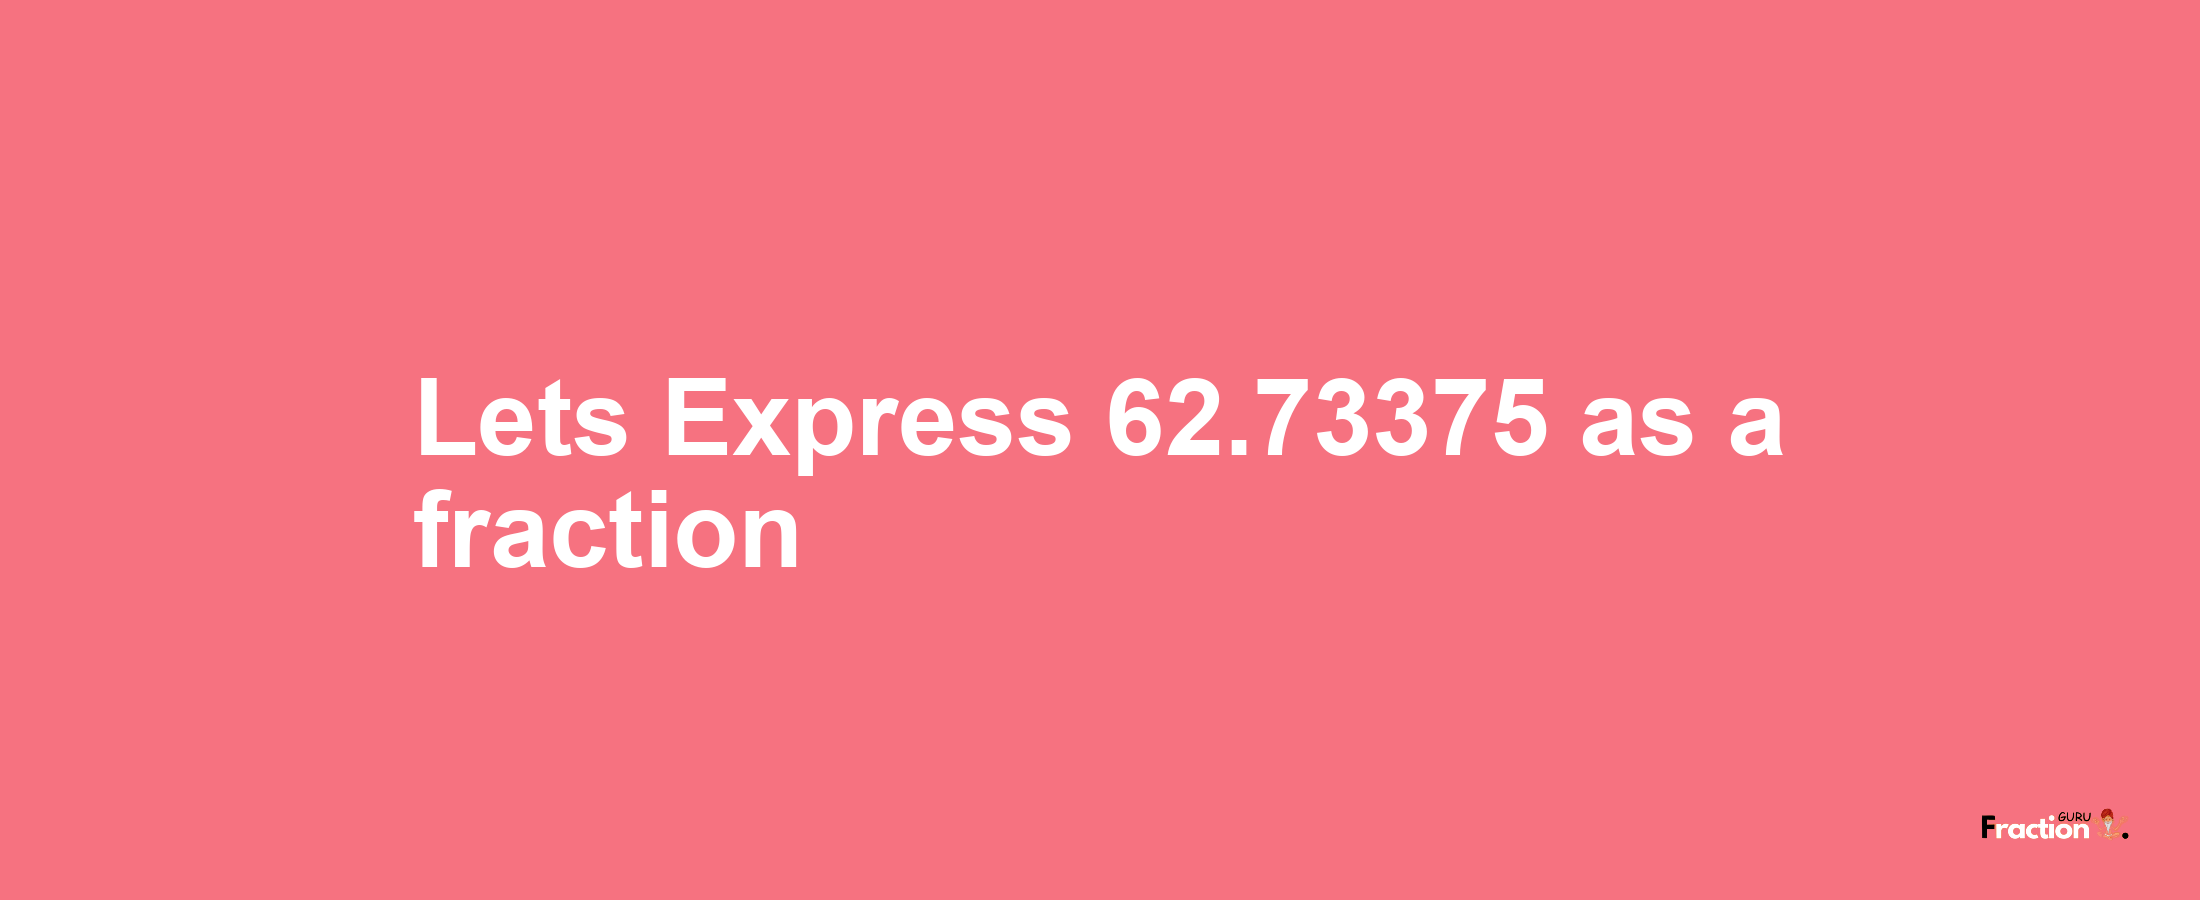 Lets Express 62.73375 as afraction